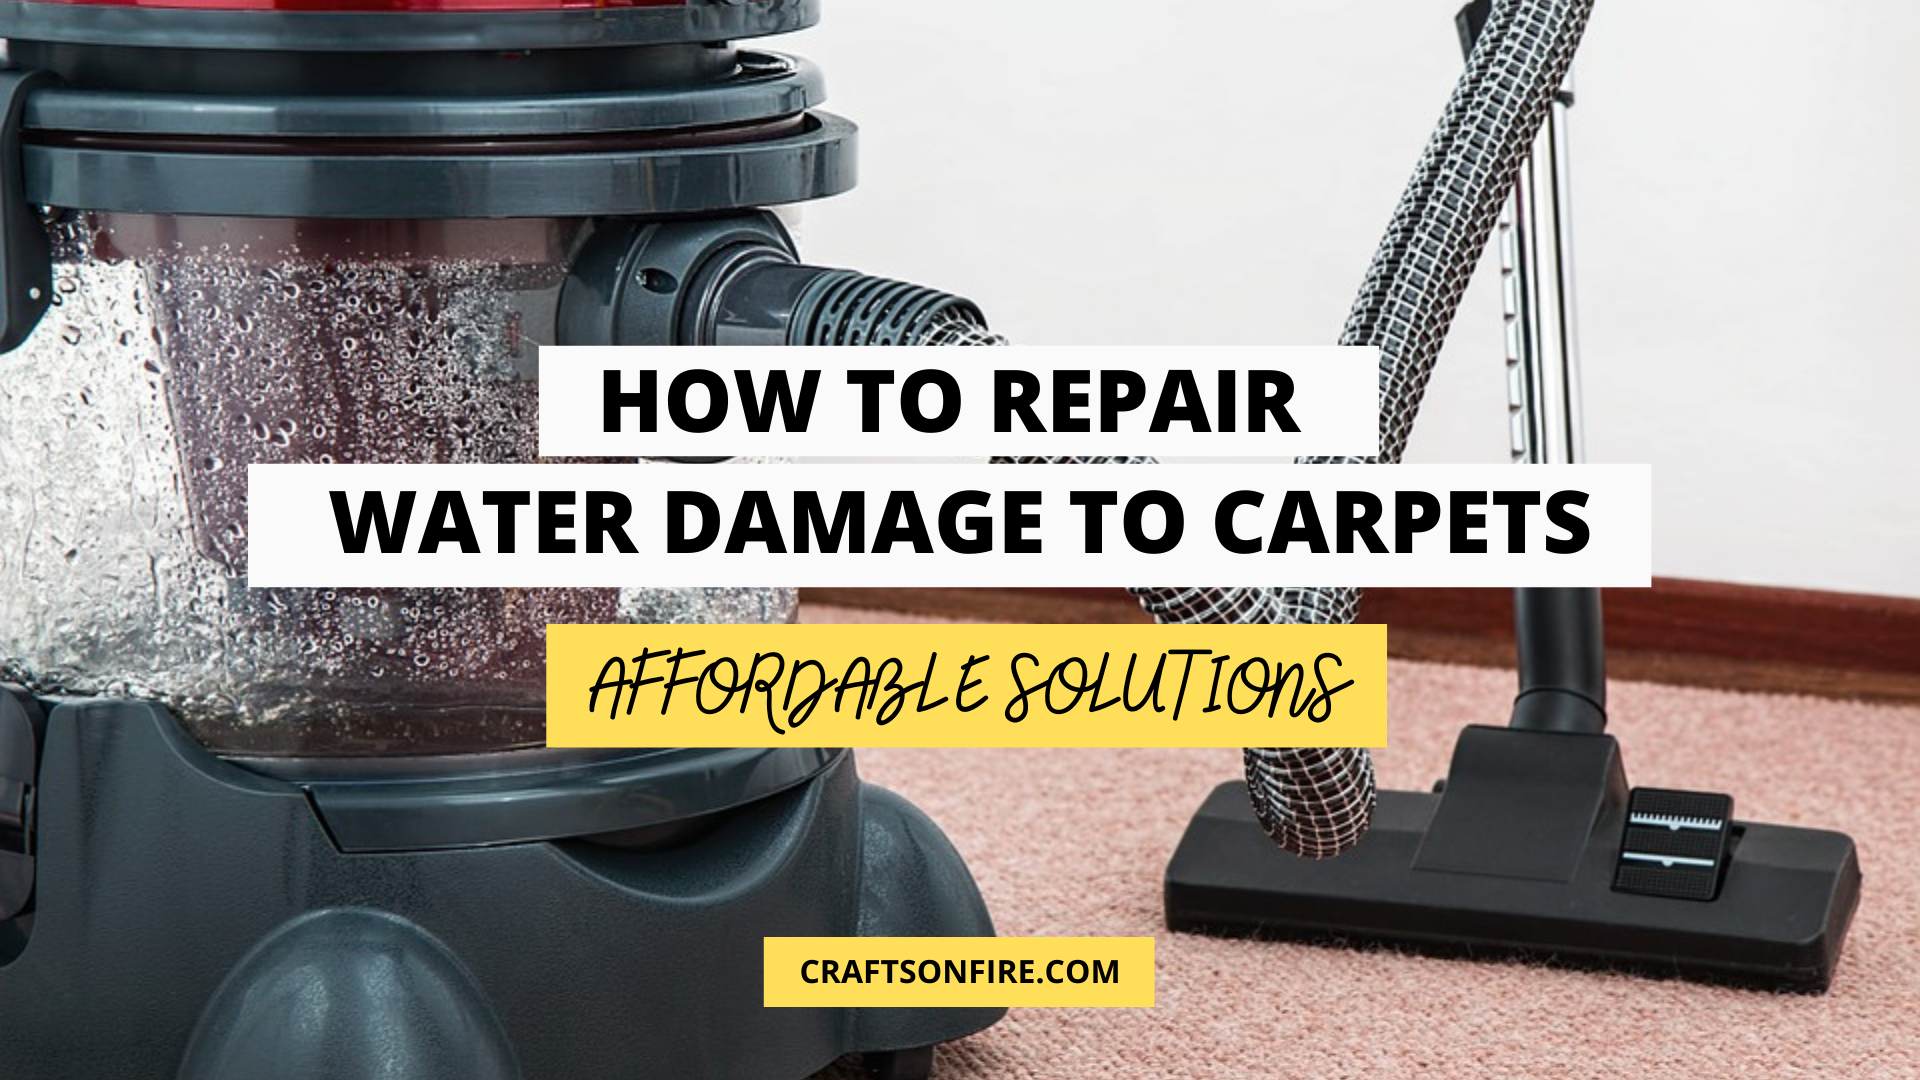 water damaged carpets, how to repair water damage carpet, water damage carpet, wet carpet